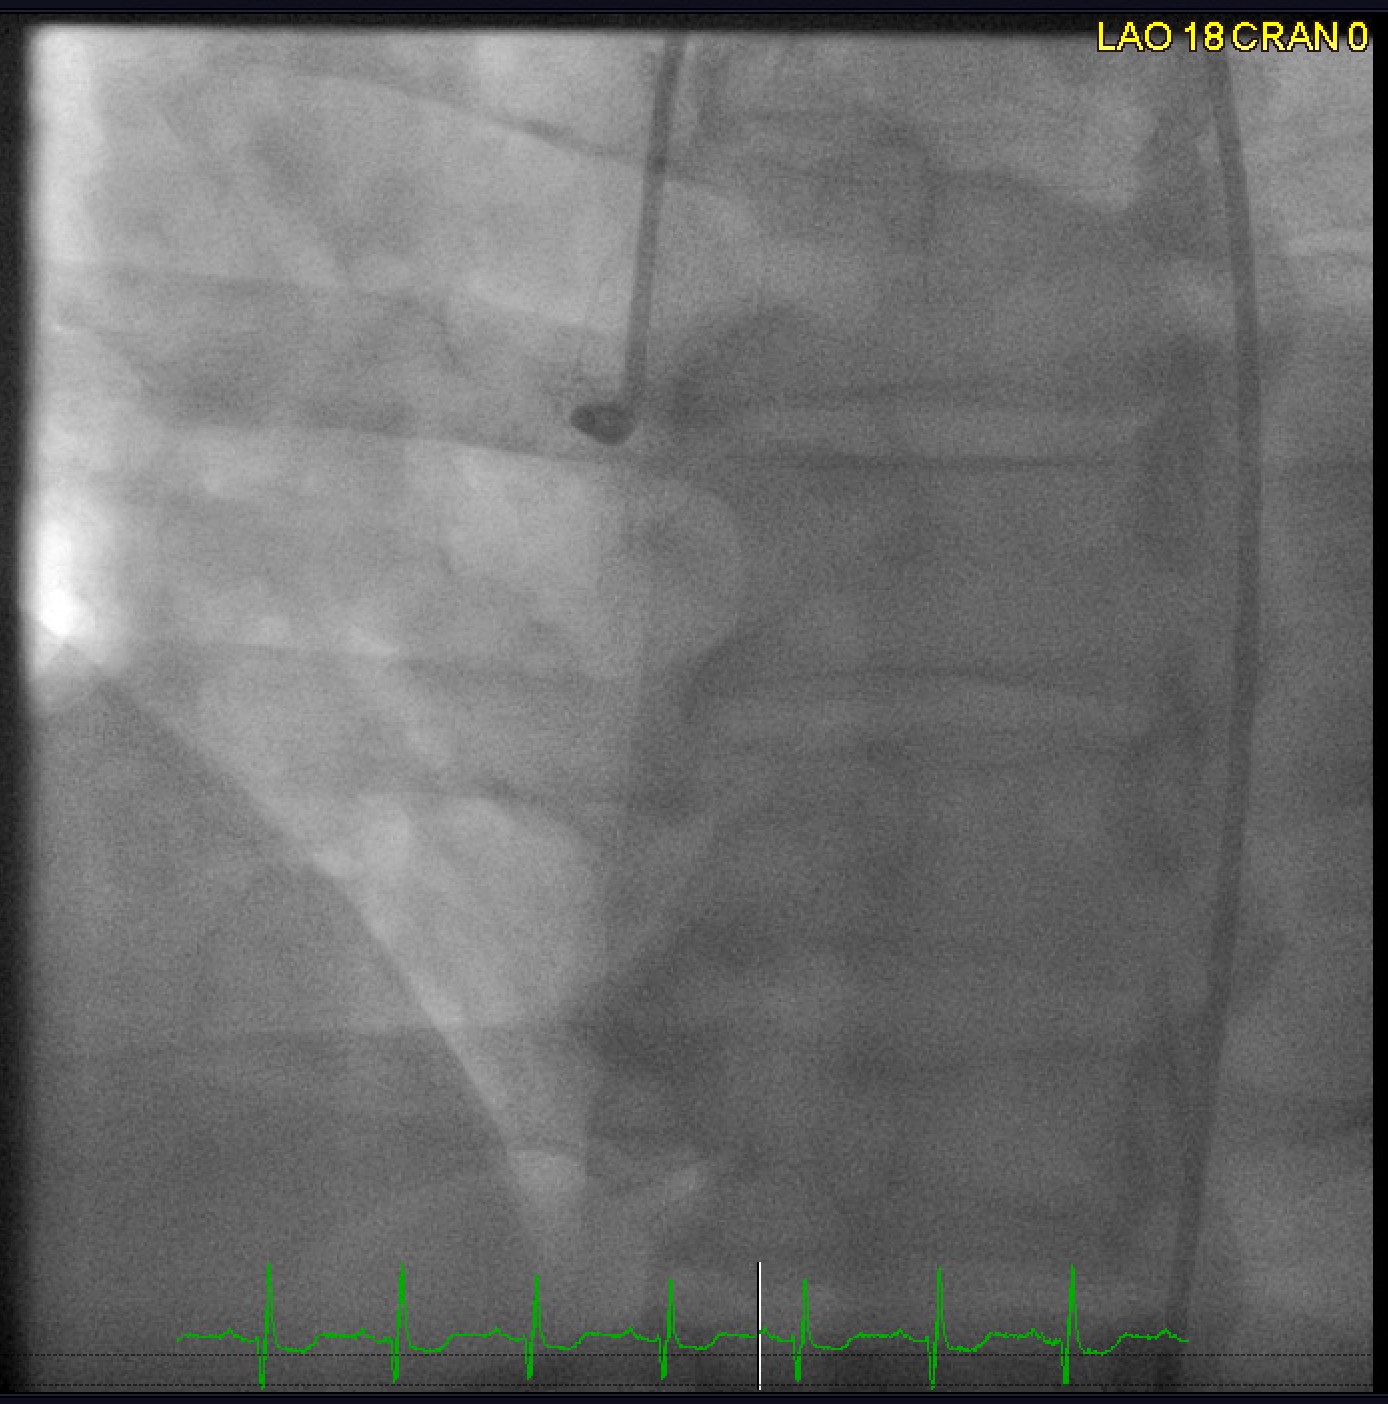 Coronary angiogram in a patient with radiation-induced coronary artery disease with blunt stump chronic total occlusion of the right coronary artery